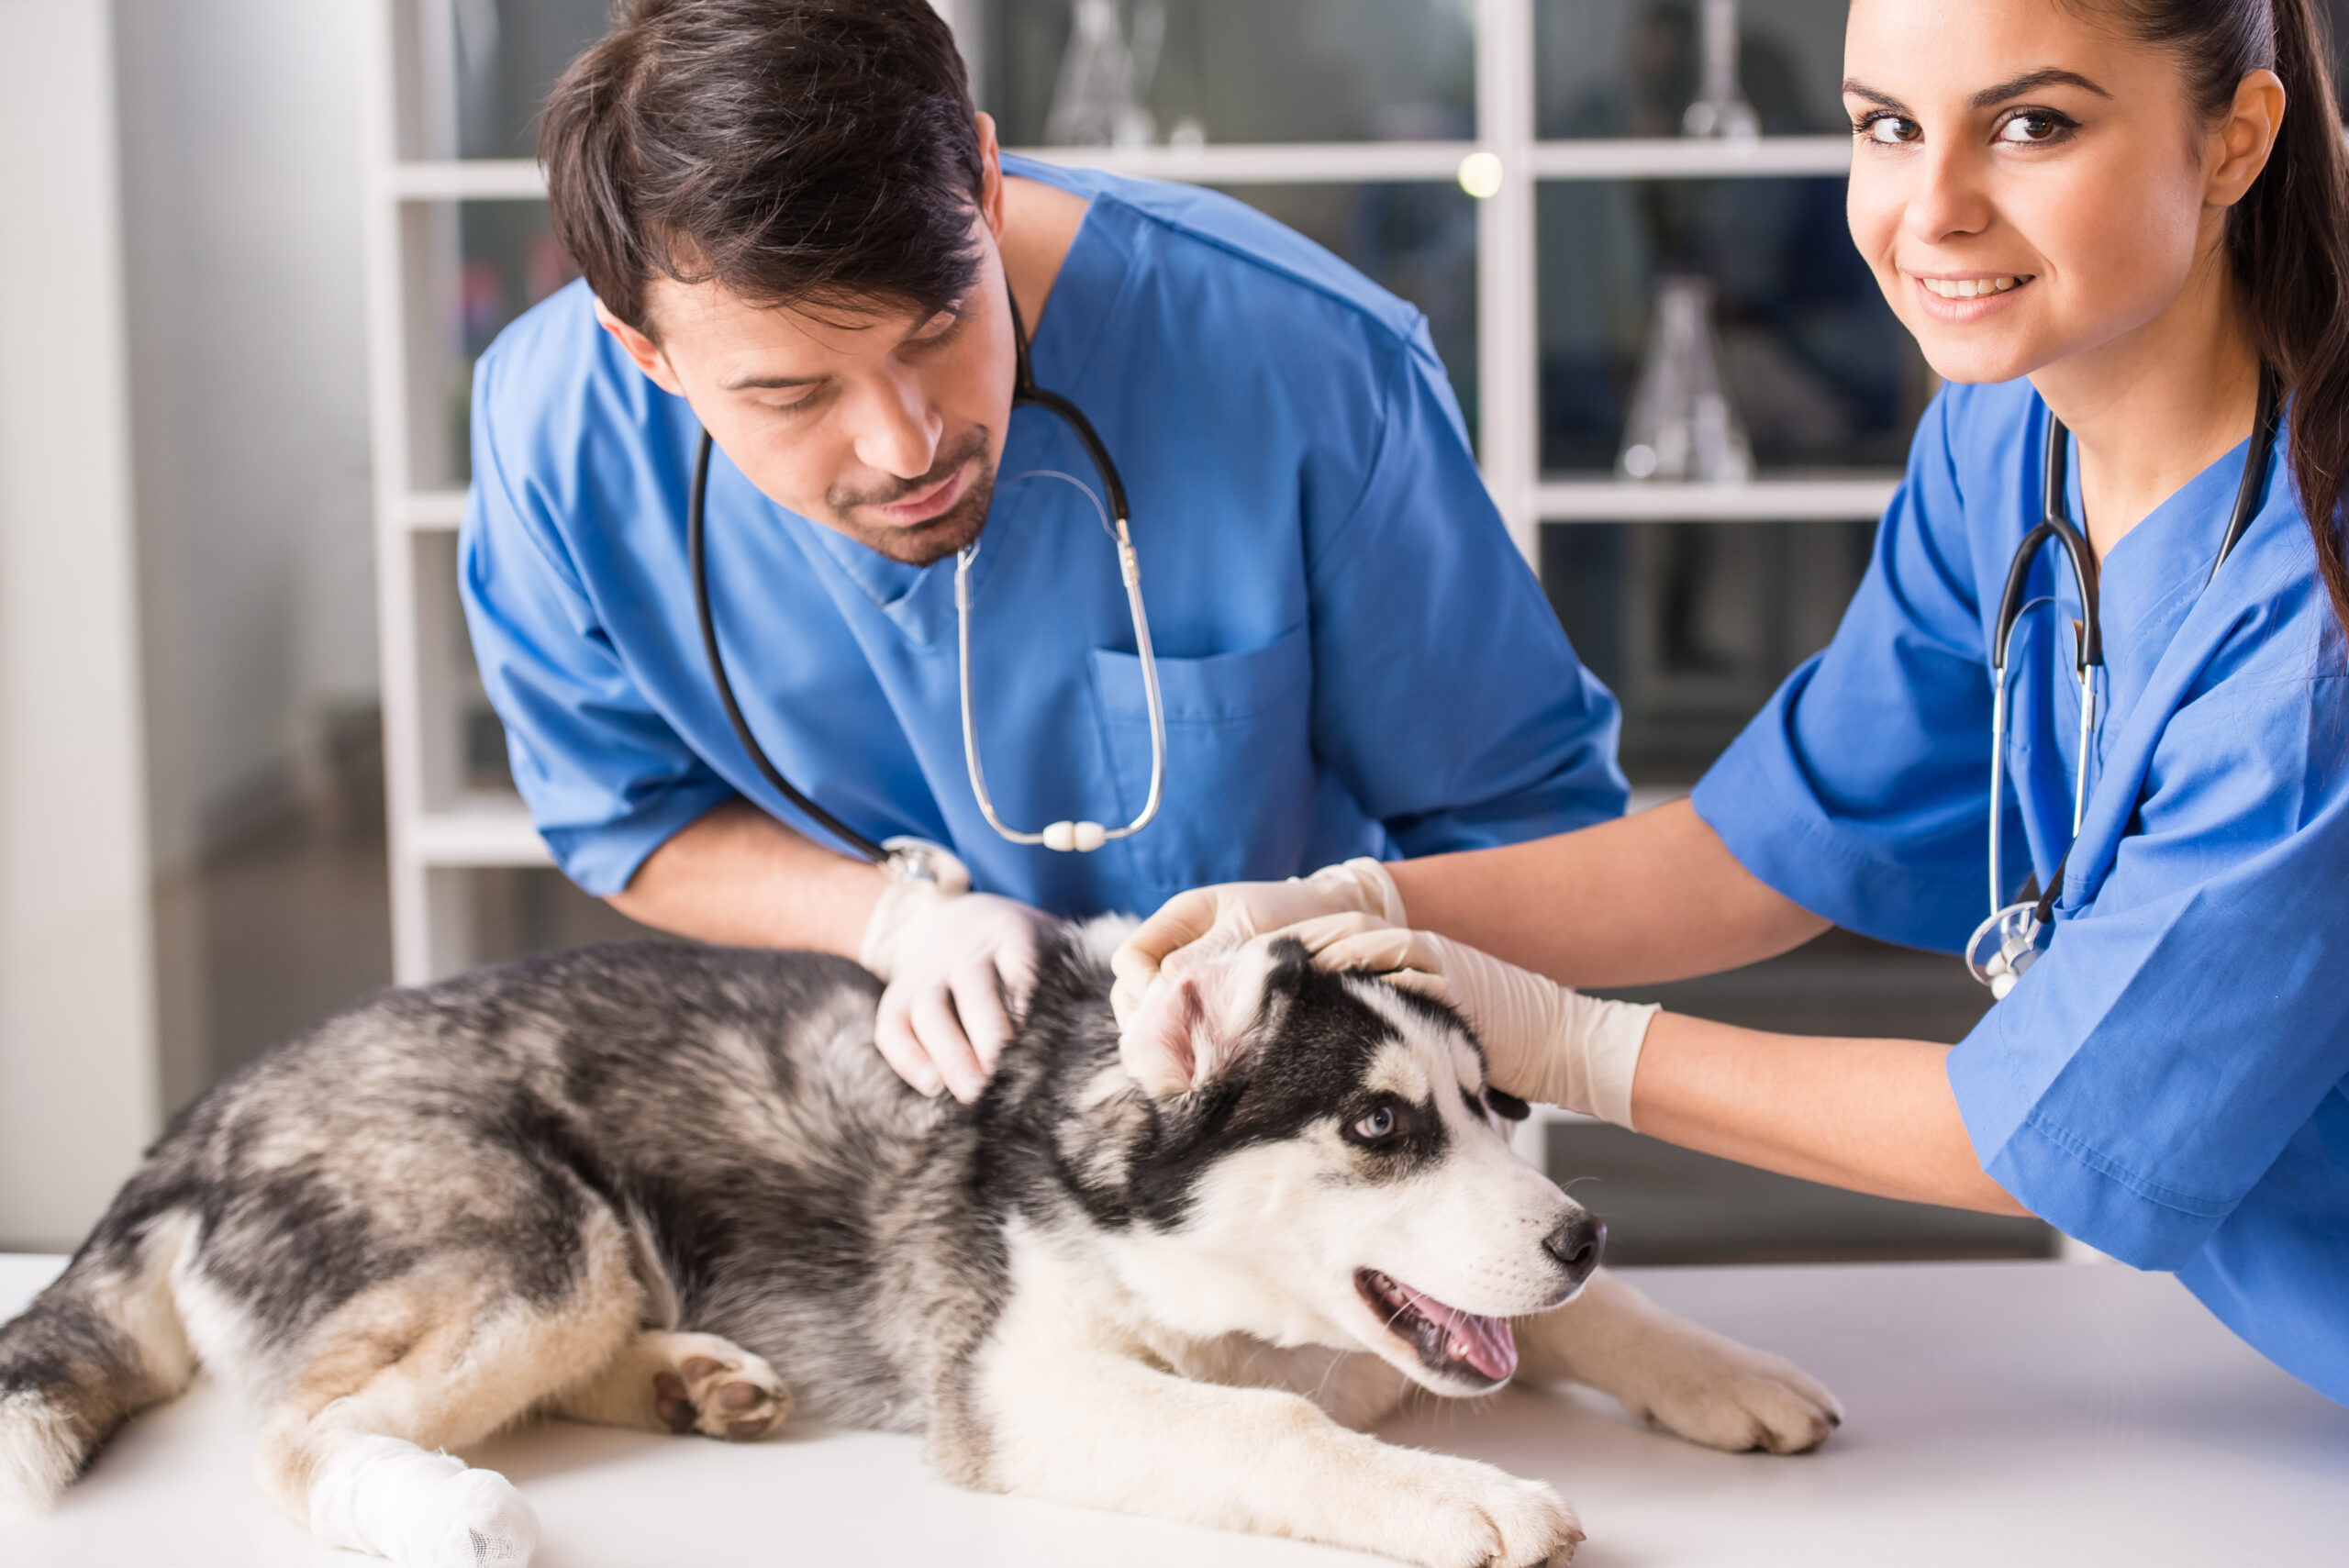 Learn About Central Coast College’s Veterinary Assistant (VA) Program